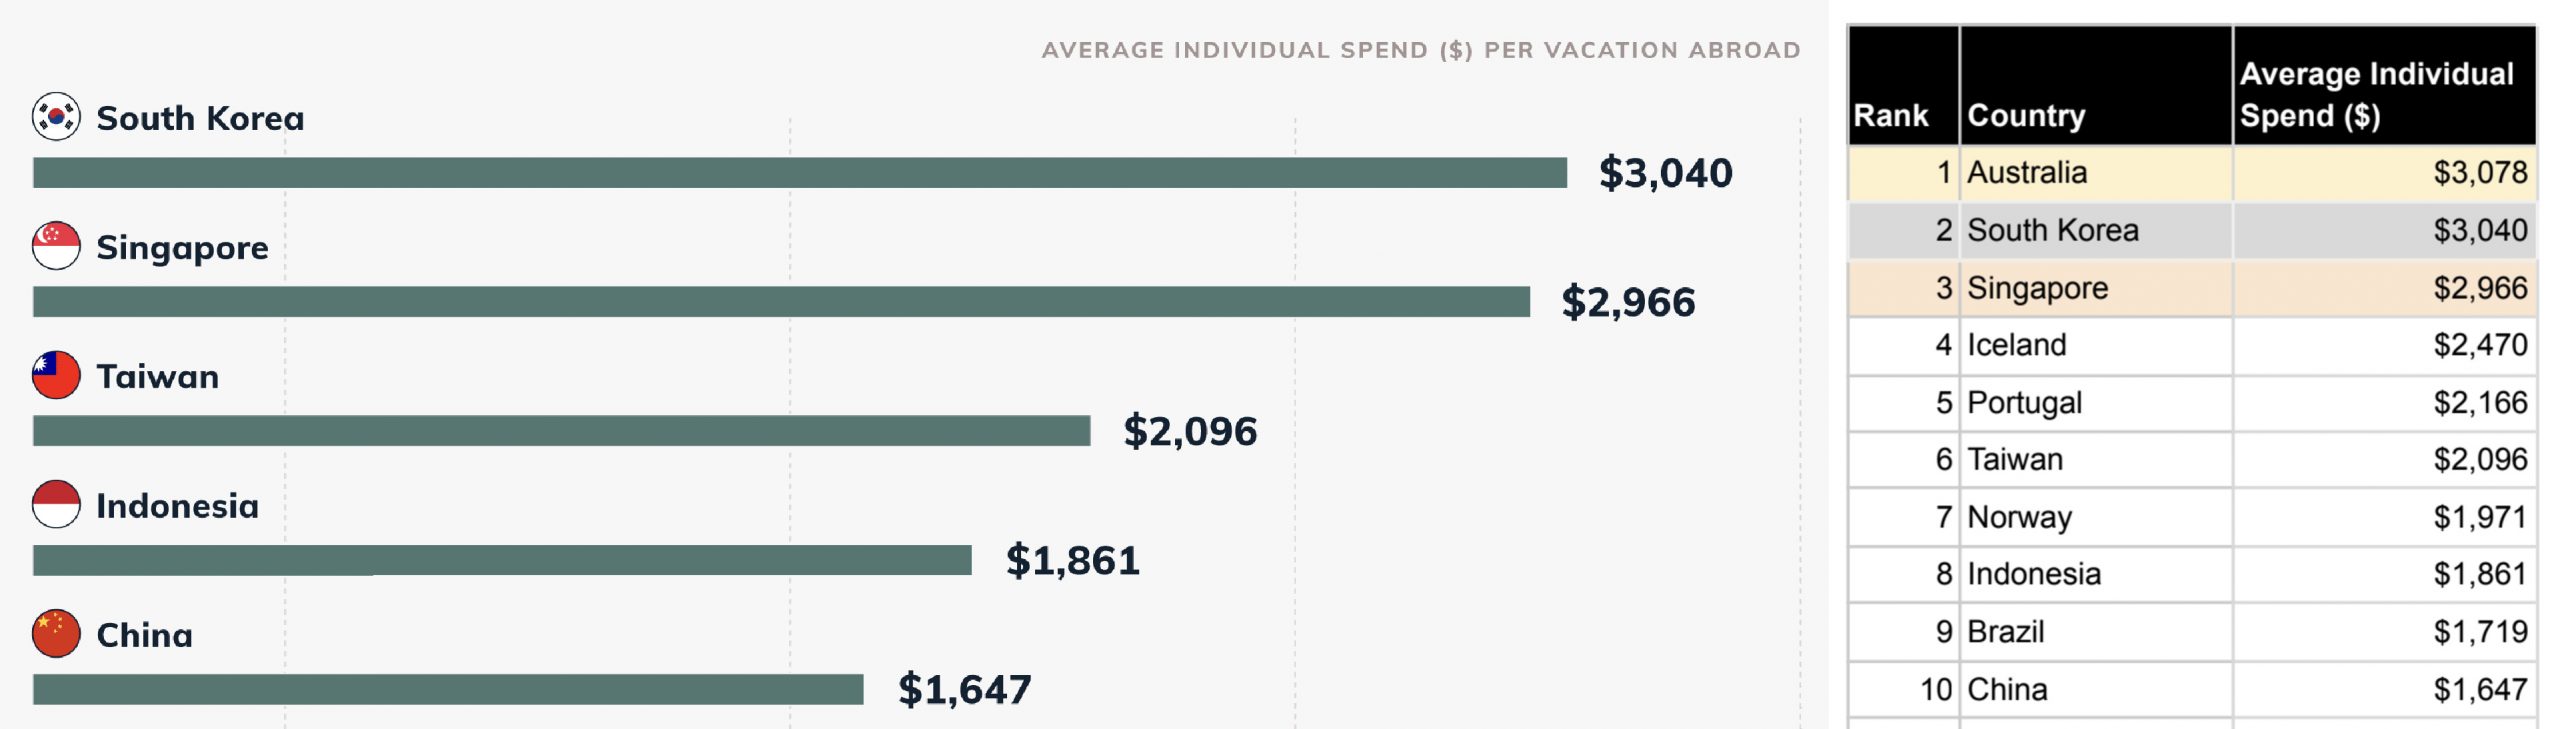 Ranking on world's top spenders on international vacations